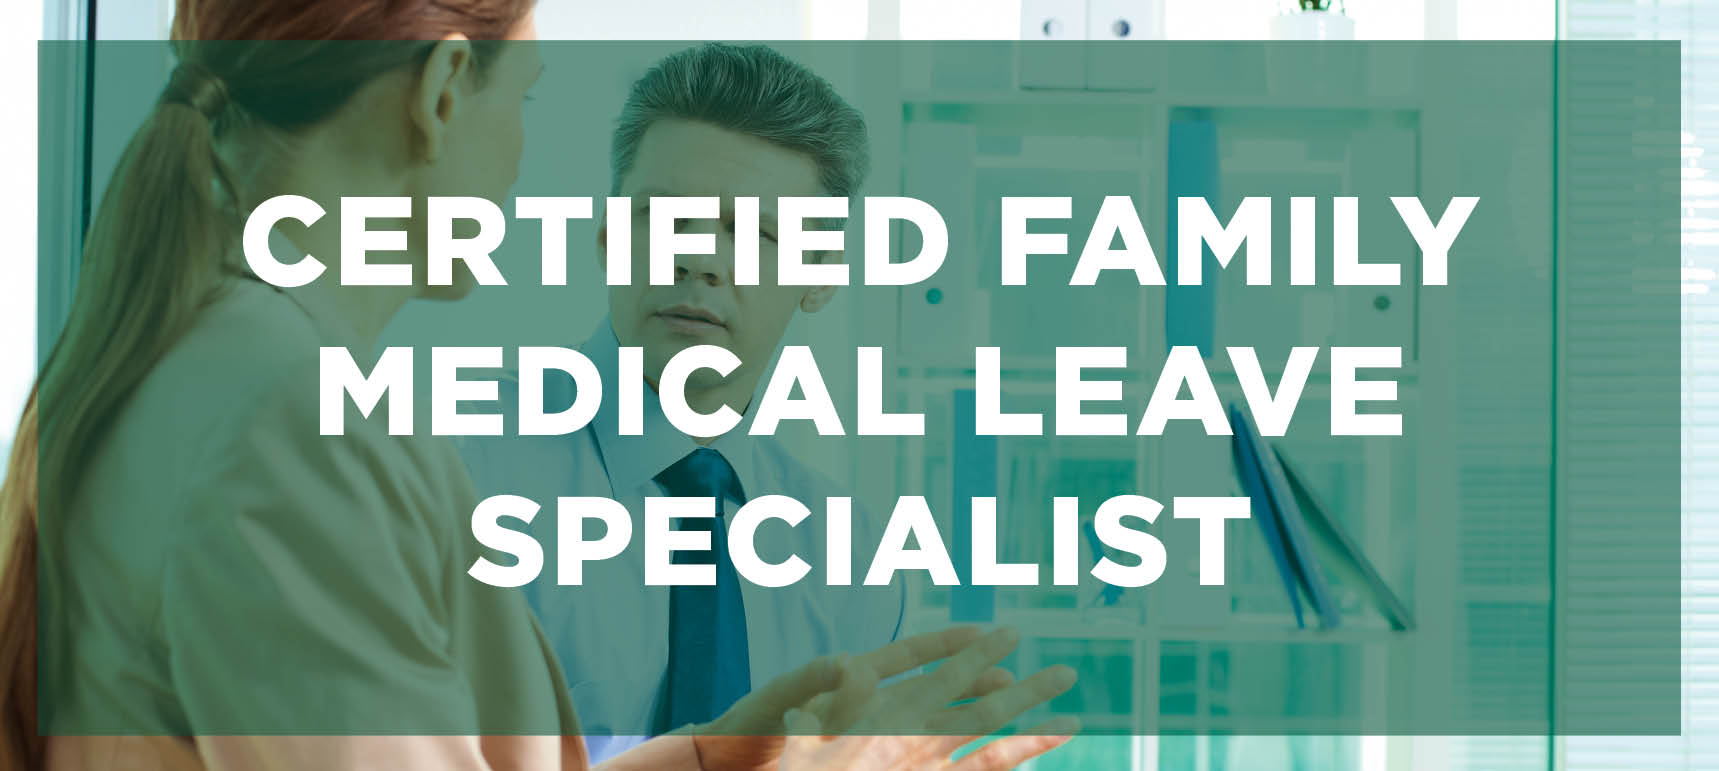 Certified Family Medical Leave Specialist